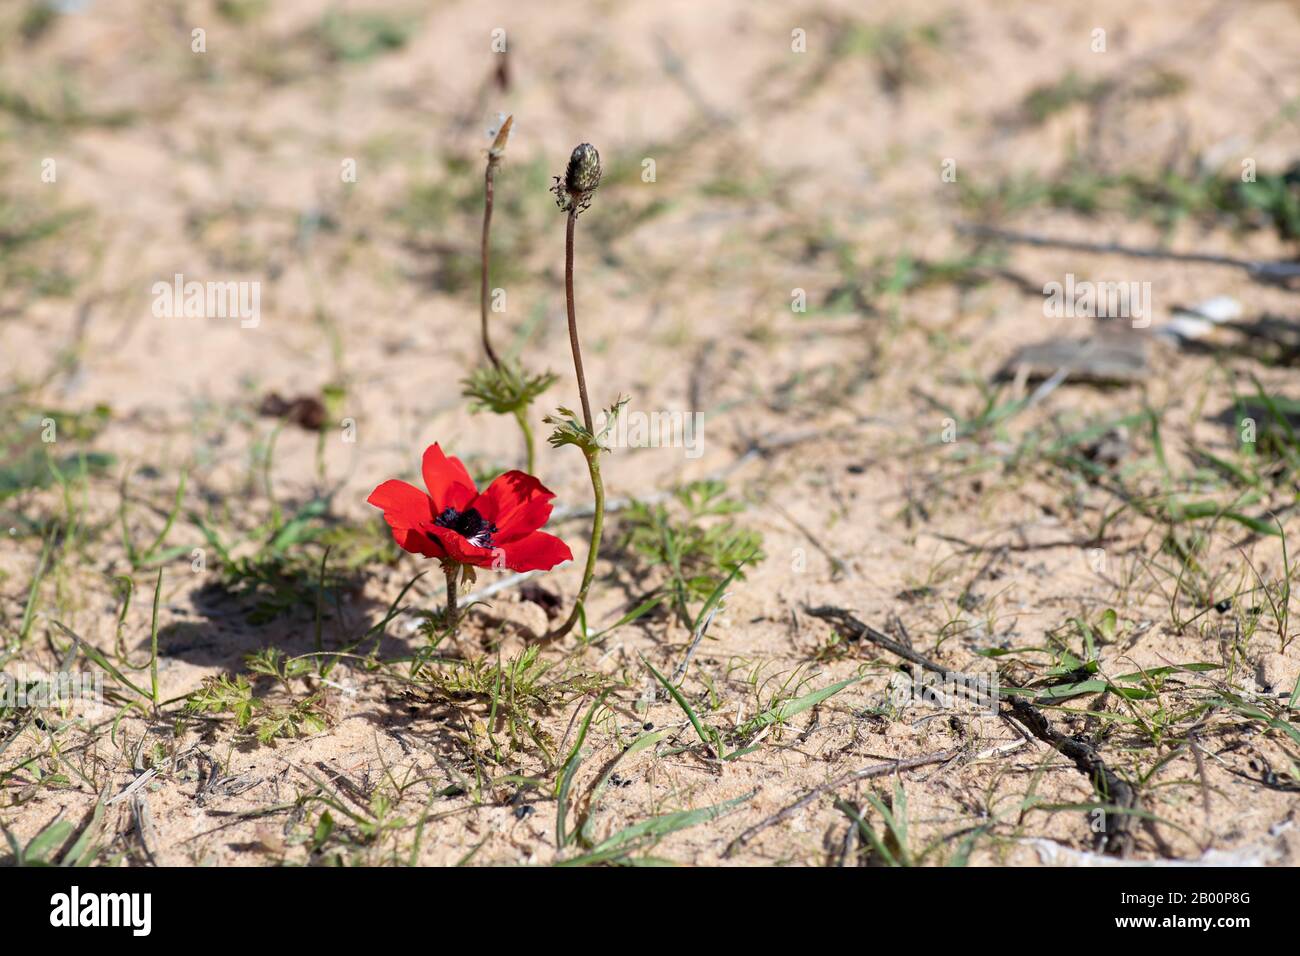 Red anemone flower with bud blooming on sandy soil close up Stock Photo